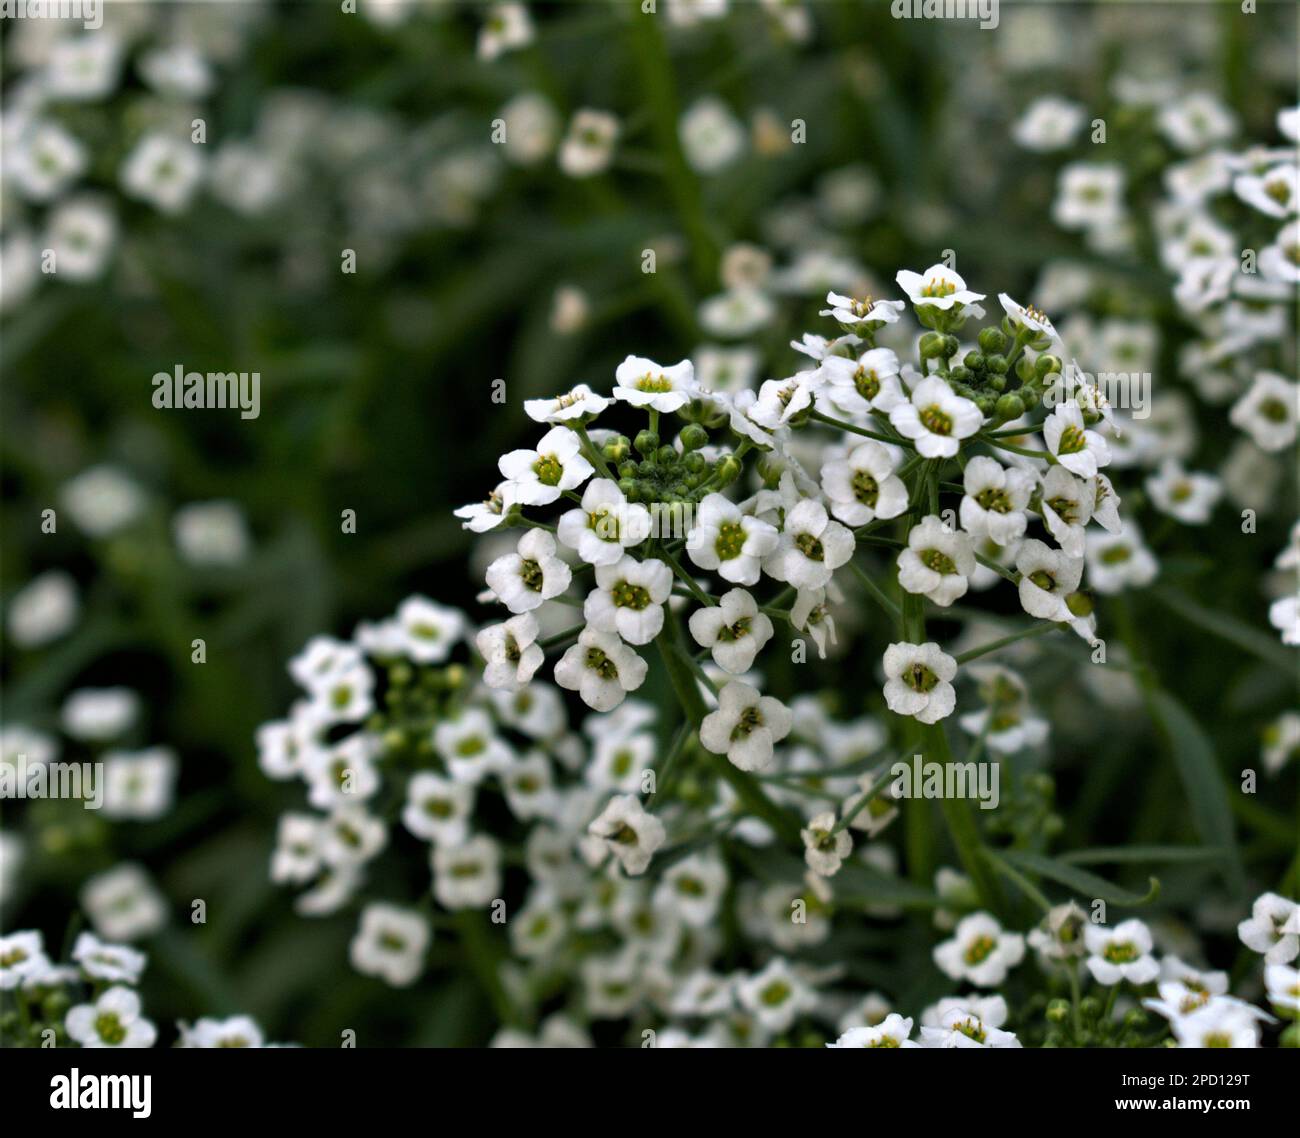 Simple Tiny White Perennials Flower Landscape Photography Wallpaper Stock Photo